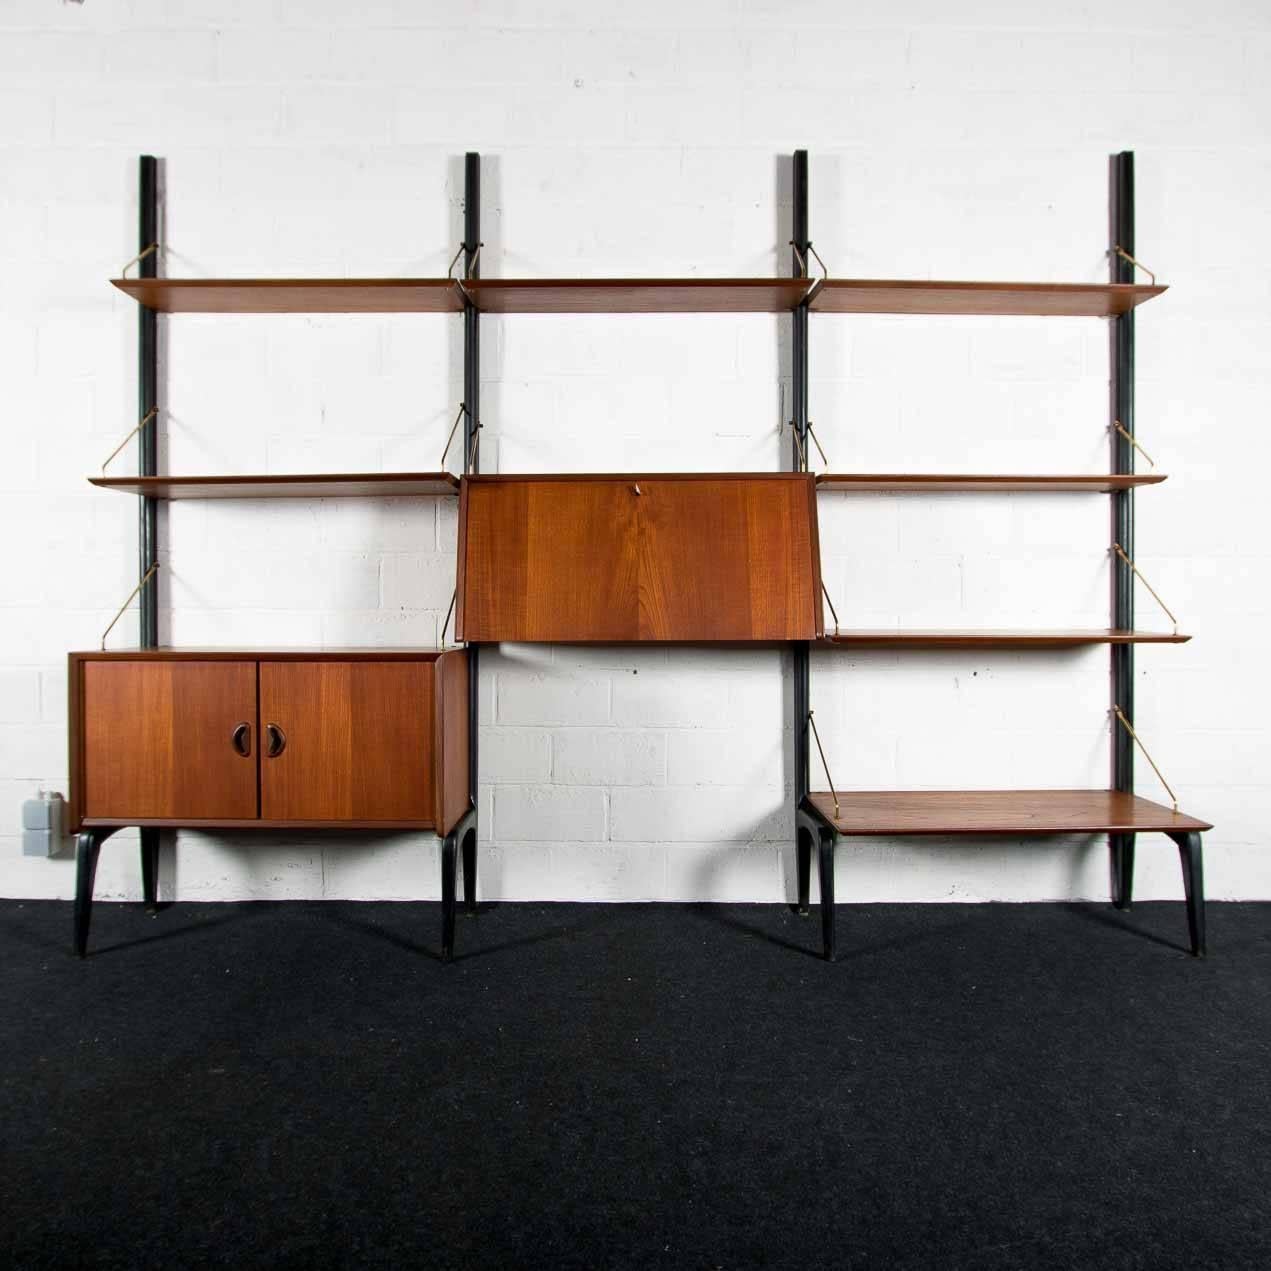 Wall unit by Dutch designer Louis Van Teeffelen for Wébé.
Has four pillars in black lacquered wood.
The shelves, desk and cabinet are modular and can be adjust to your own wishes.